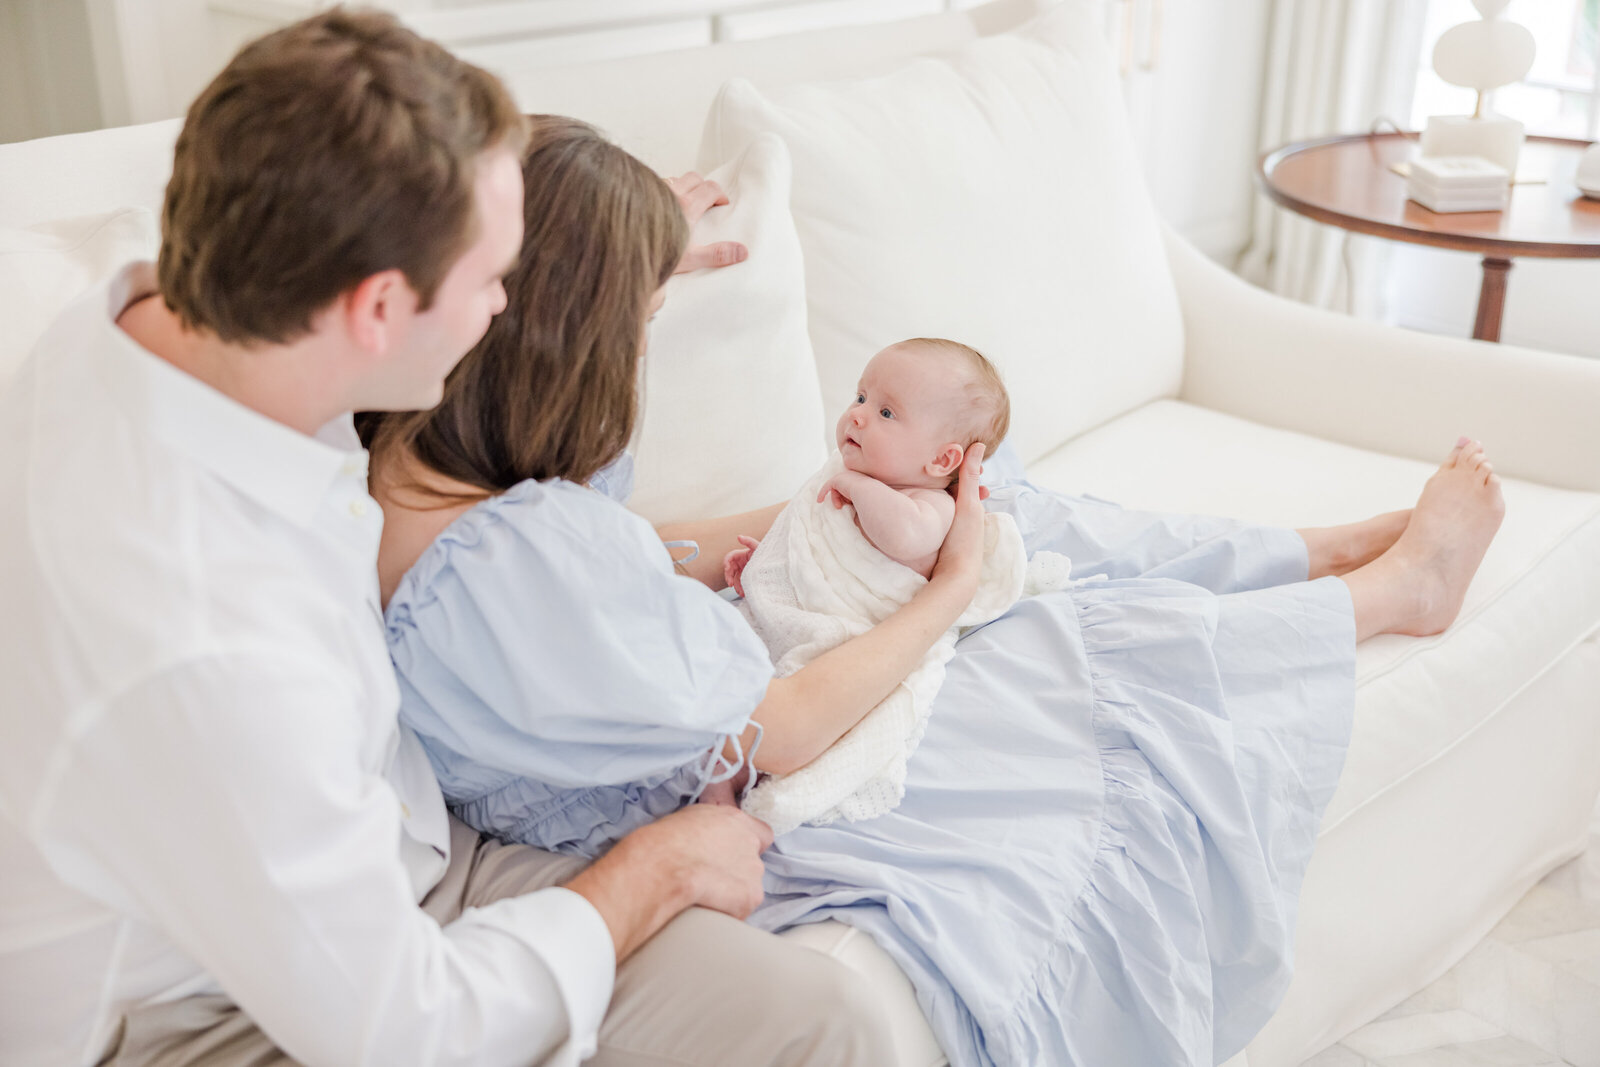 Parents seated on a couch with a newborn in their arms.